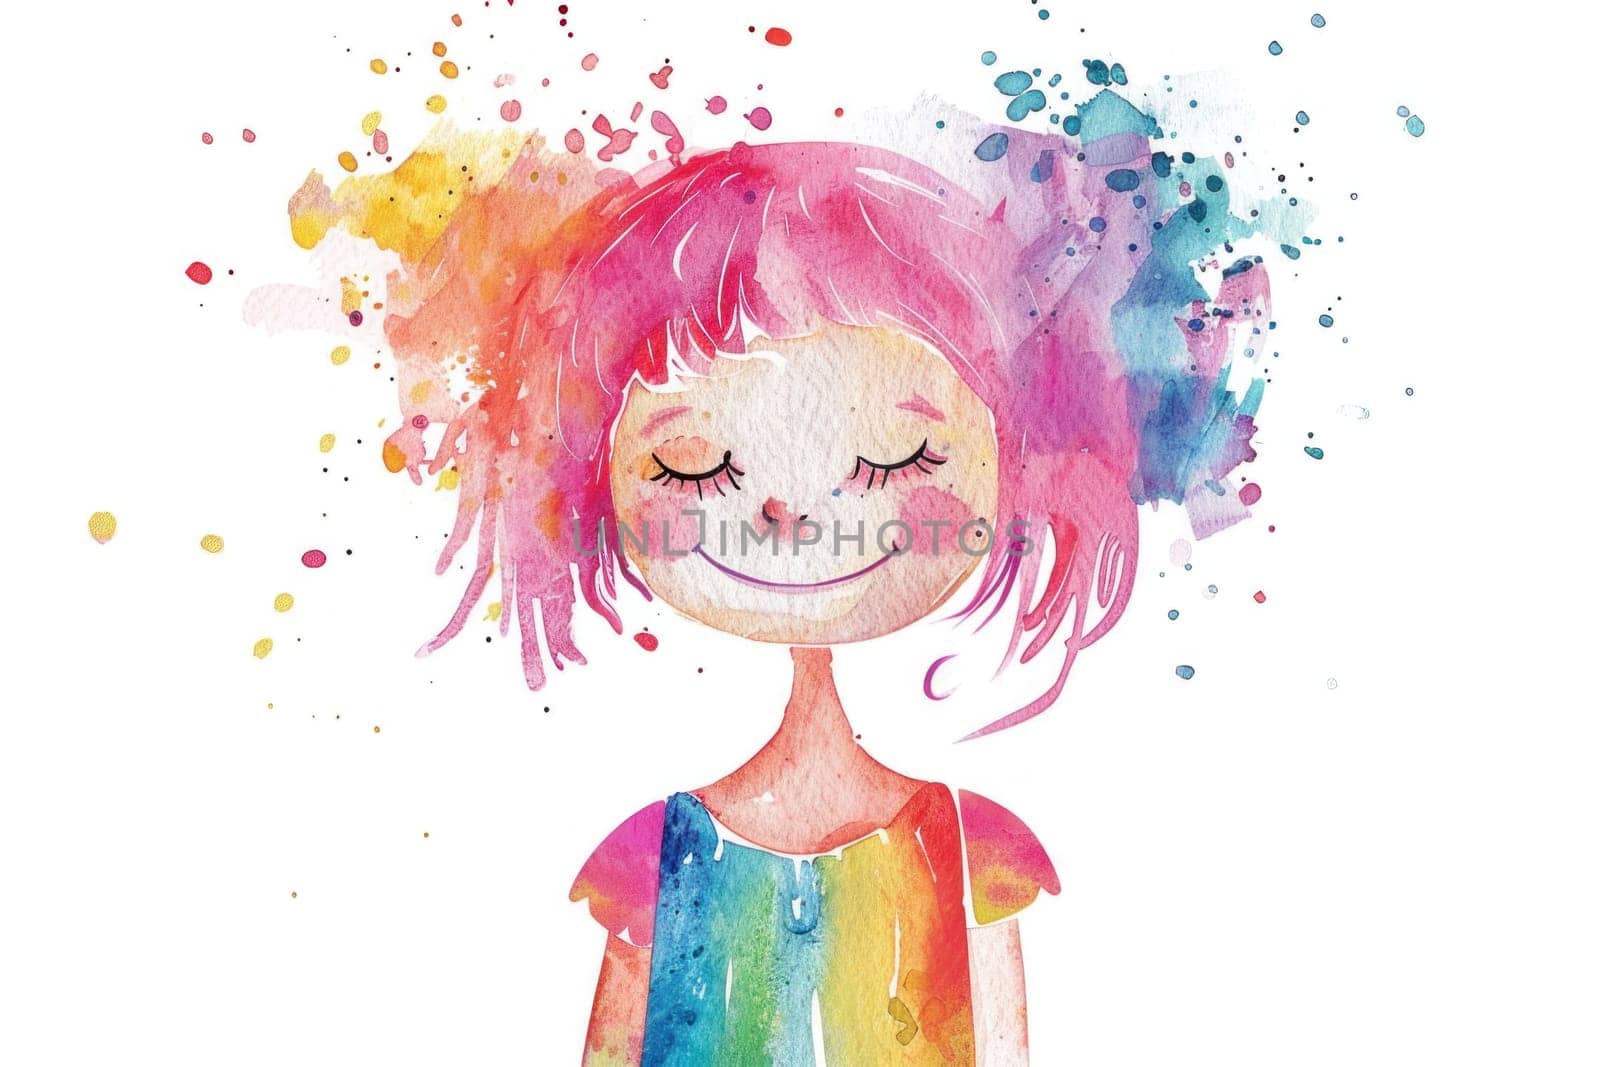 Beauty portrait of a creative colorful girl in watercolor with pink and rainbow hair for fashion and art concepts